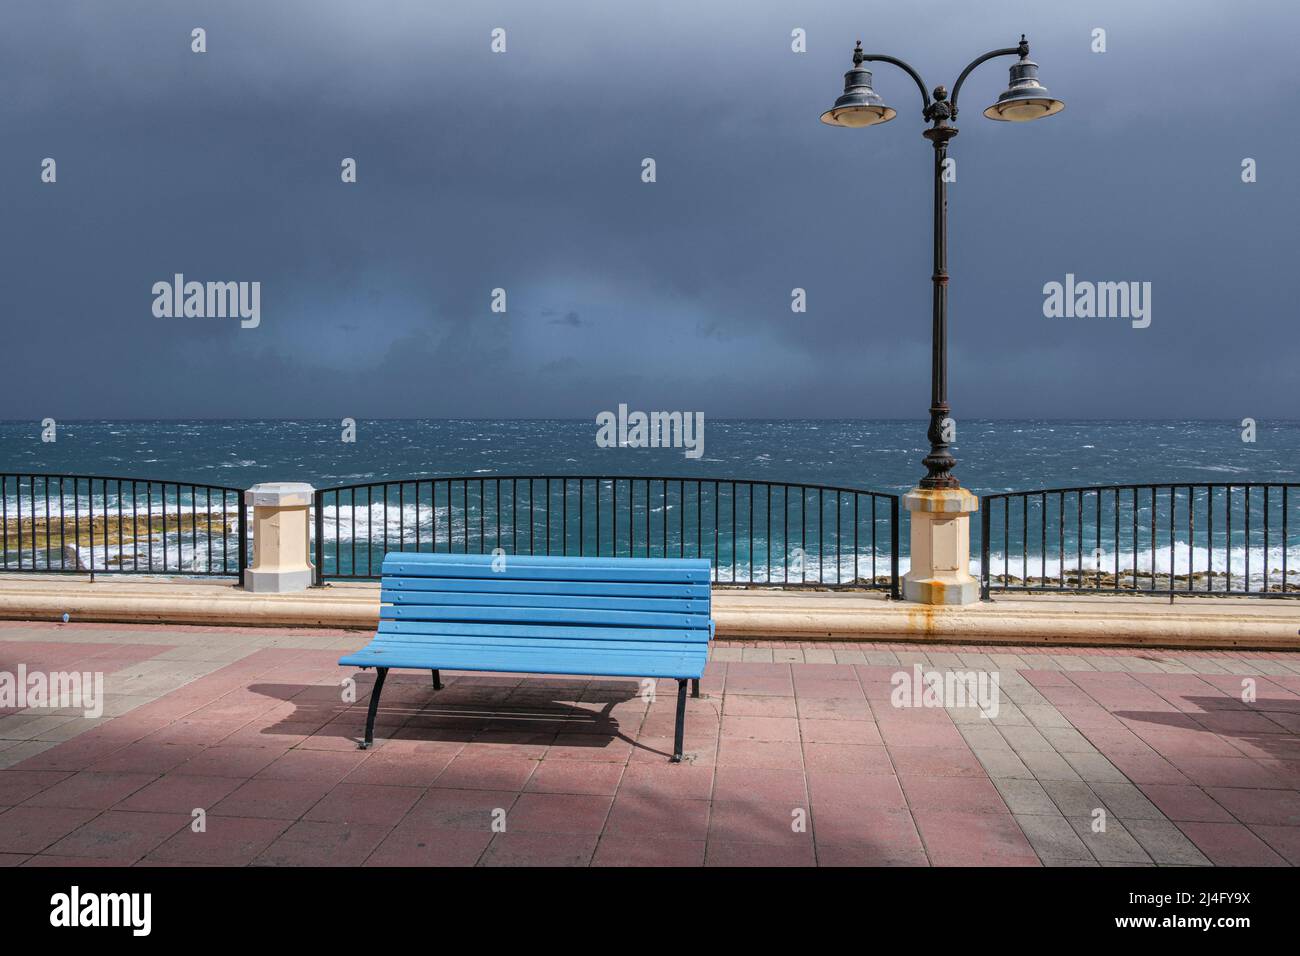 A stormy sky on the seafront at Sliema out of season, Malta Stock Photo